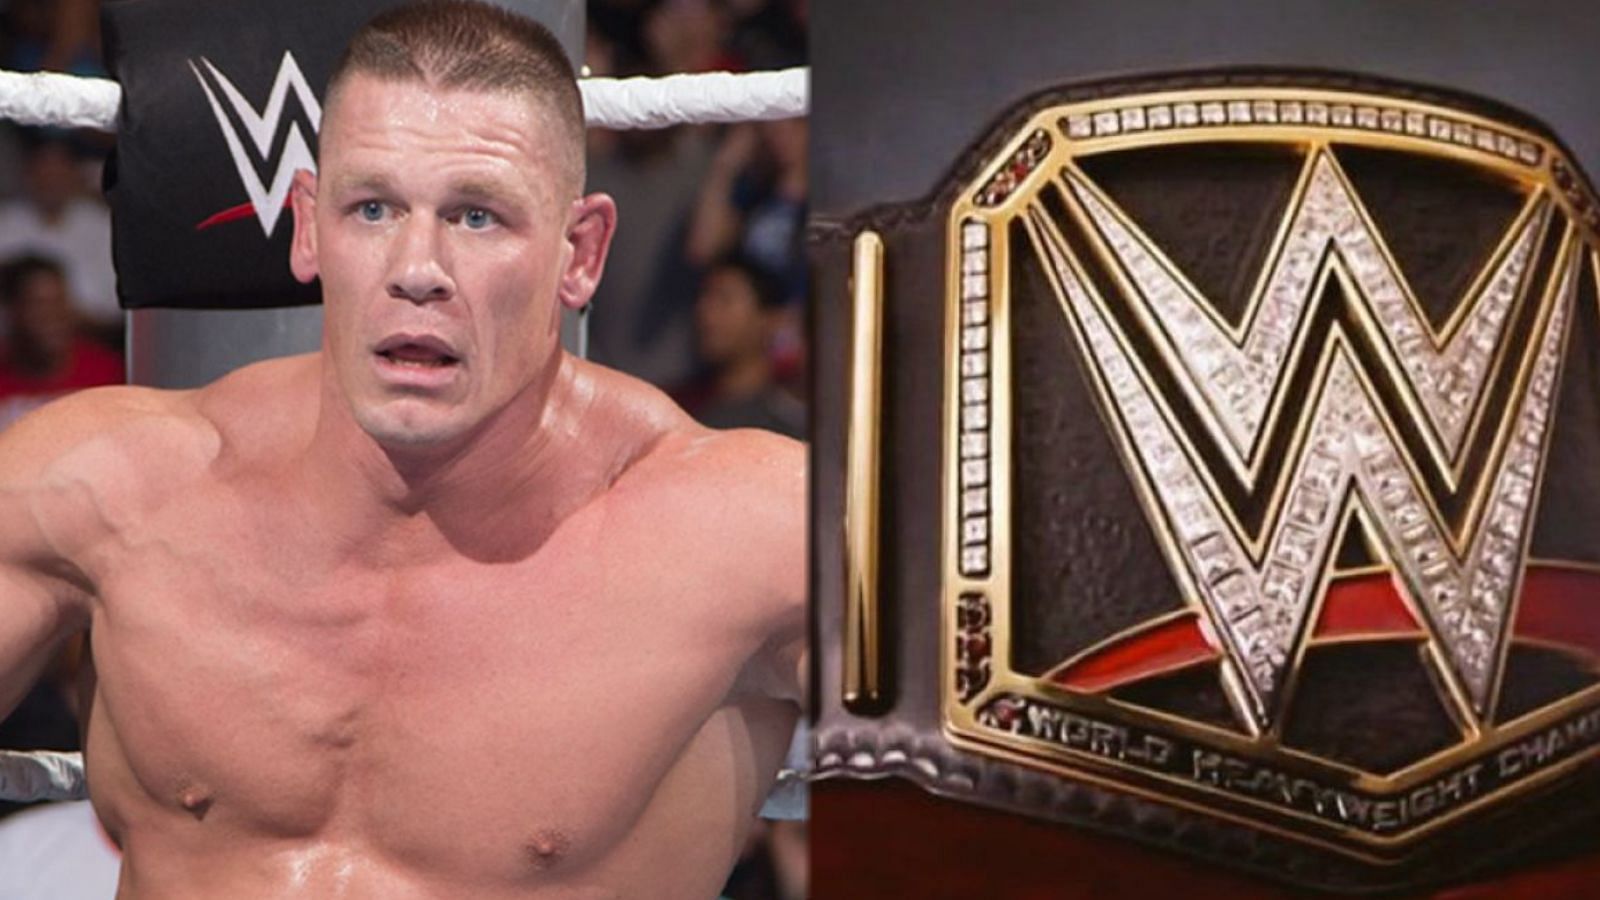 Was Cena a bad host to this star?